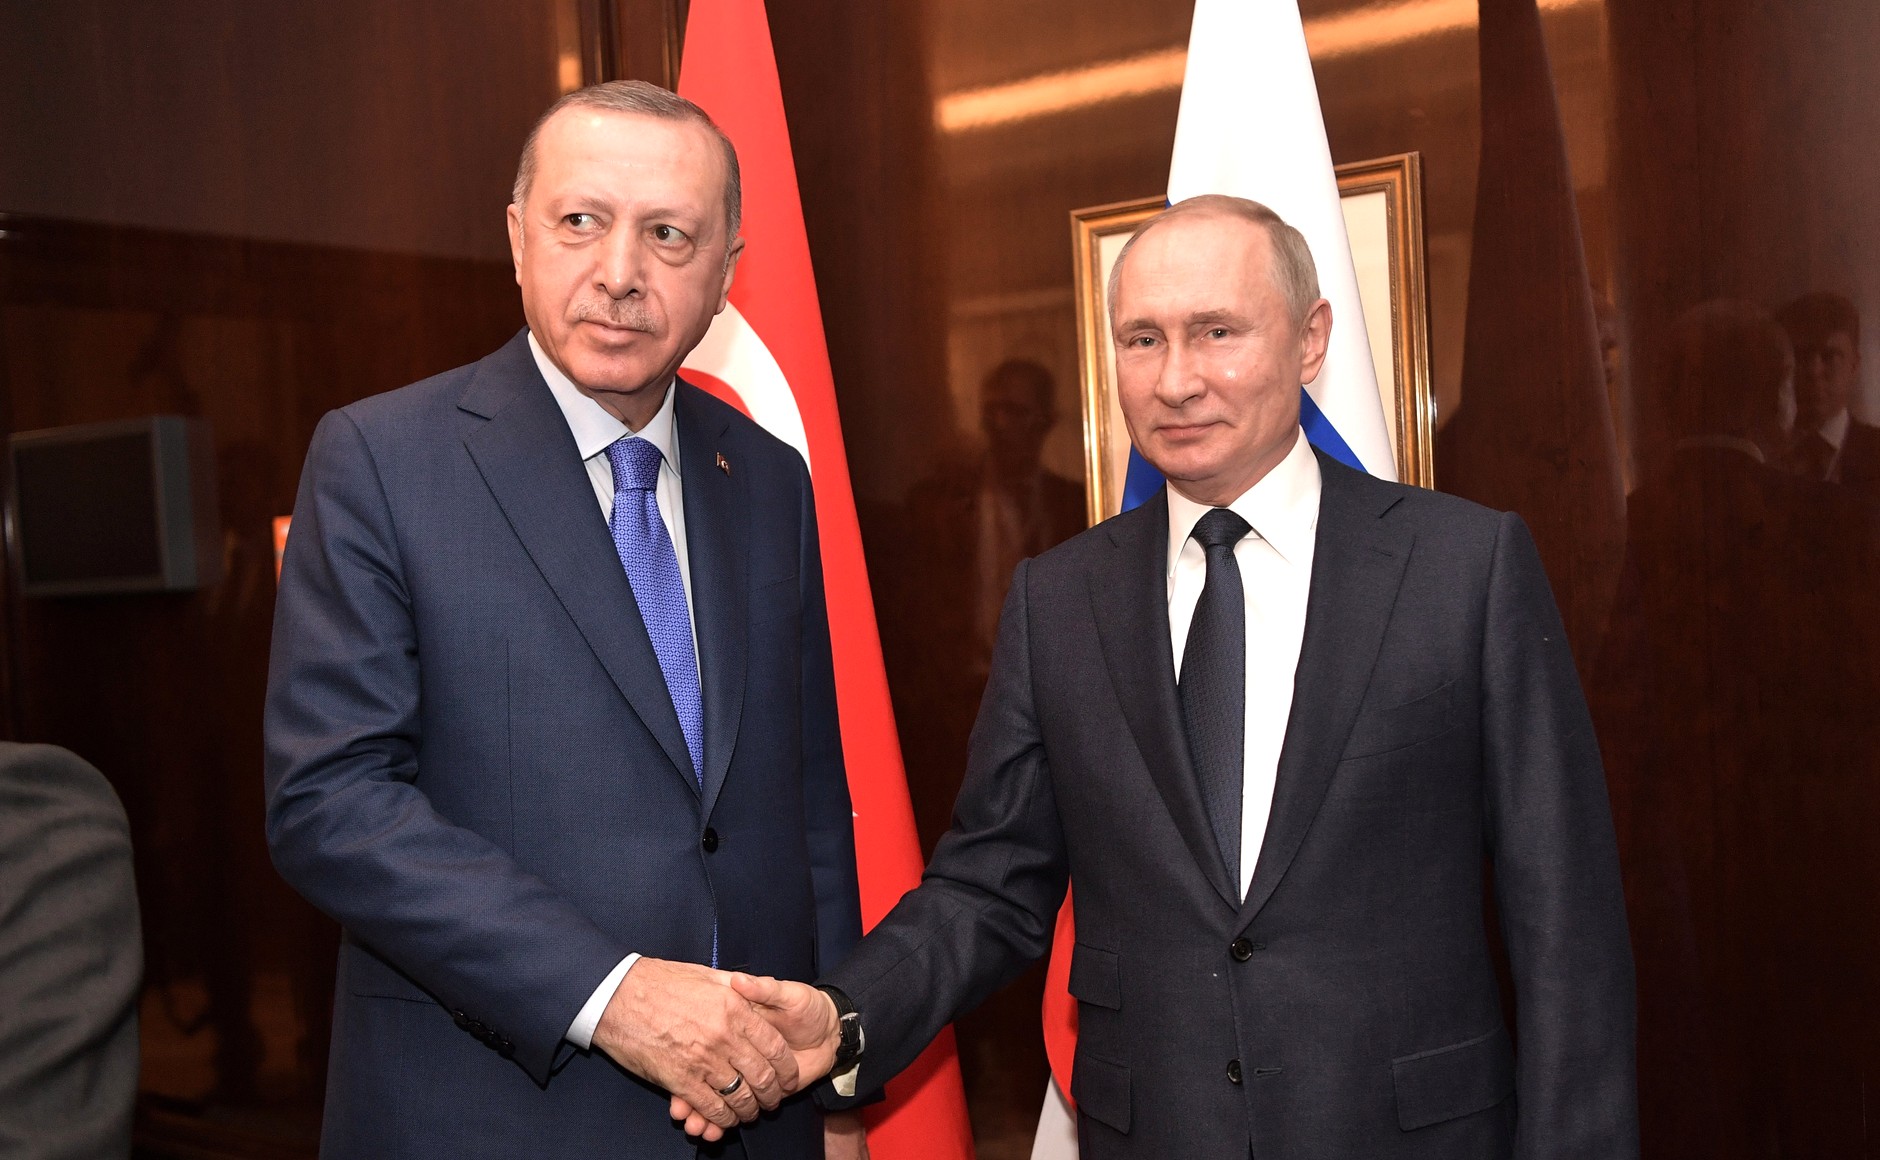 Syrian endgame and the position of the Turkish king